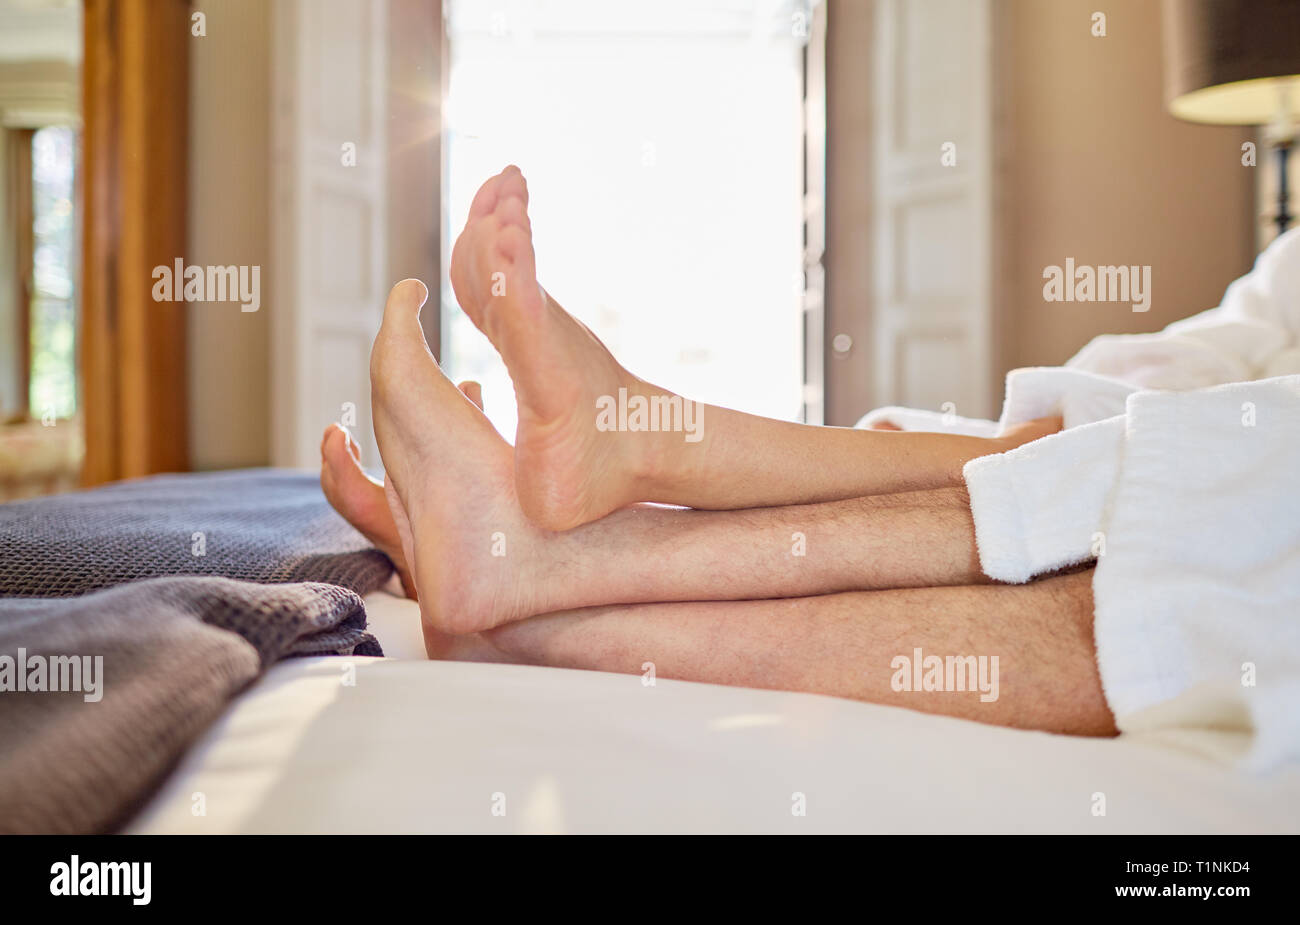 Barefoot couple relaxing on hotel bed Stock Photo